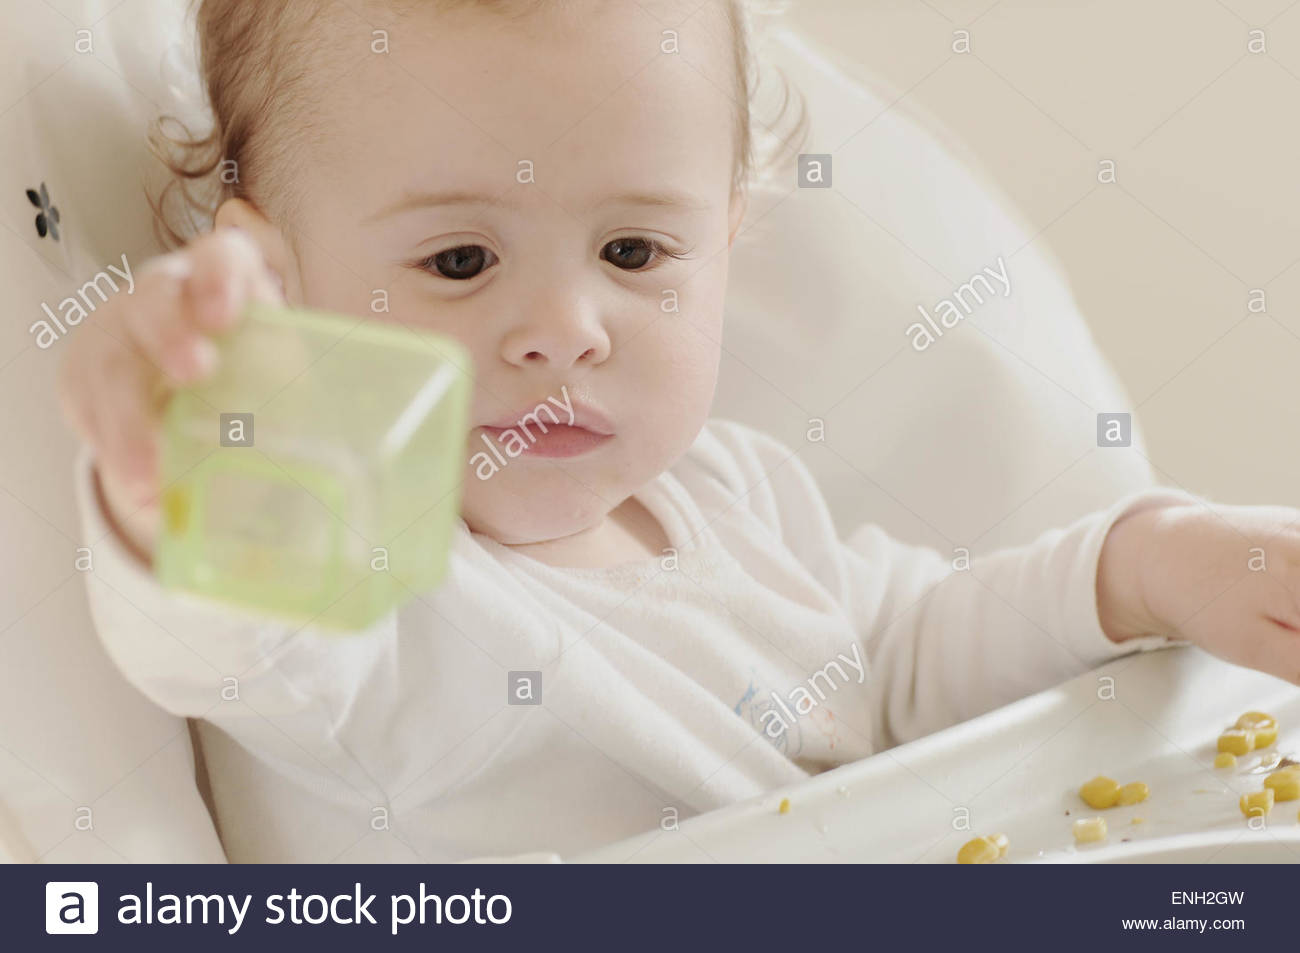 Caucasian One Year Old Baby Boy Eating Sweetcorn In A White